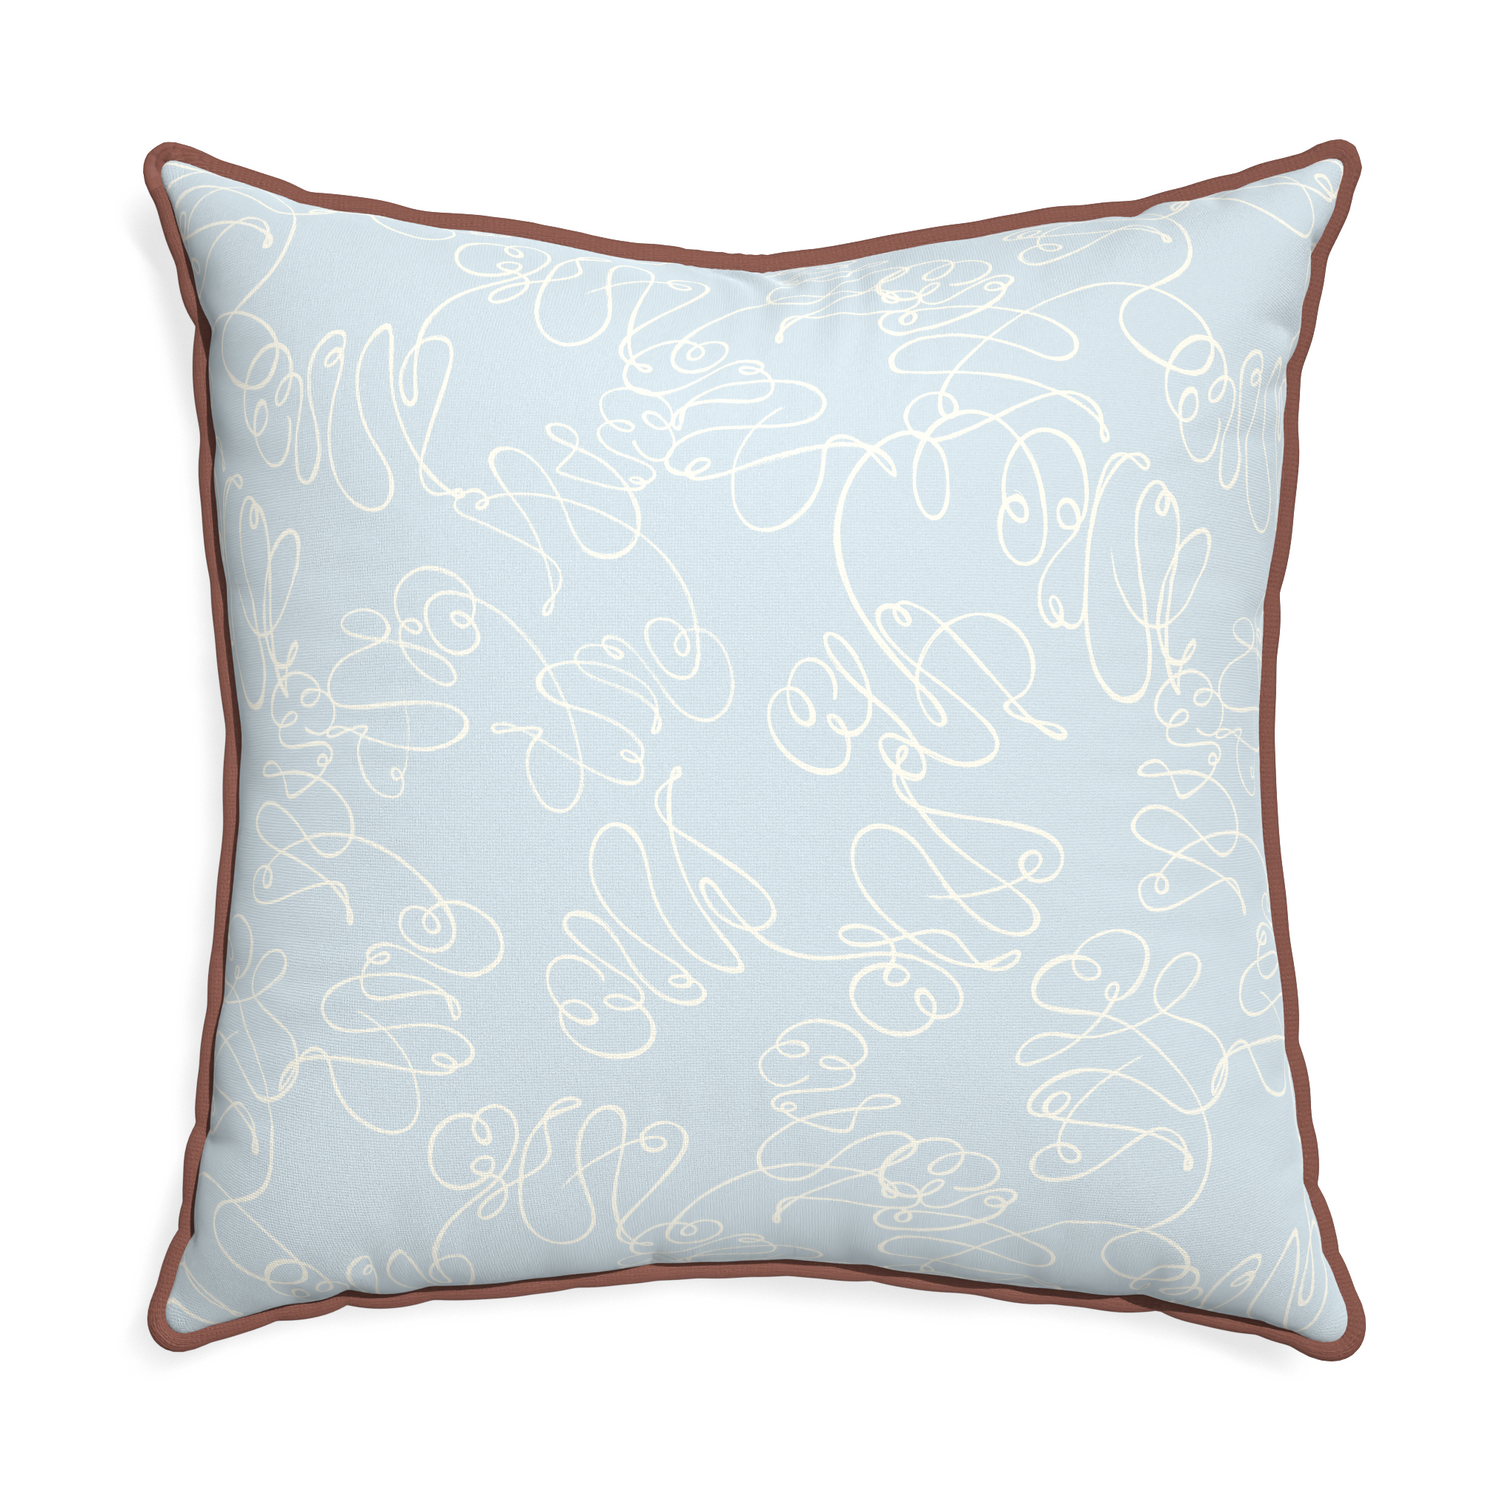 Euro-sham mirabella custom pillow with w piping on white background